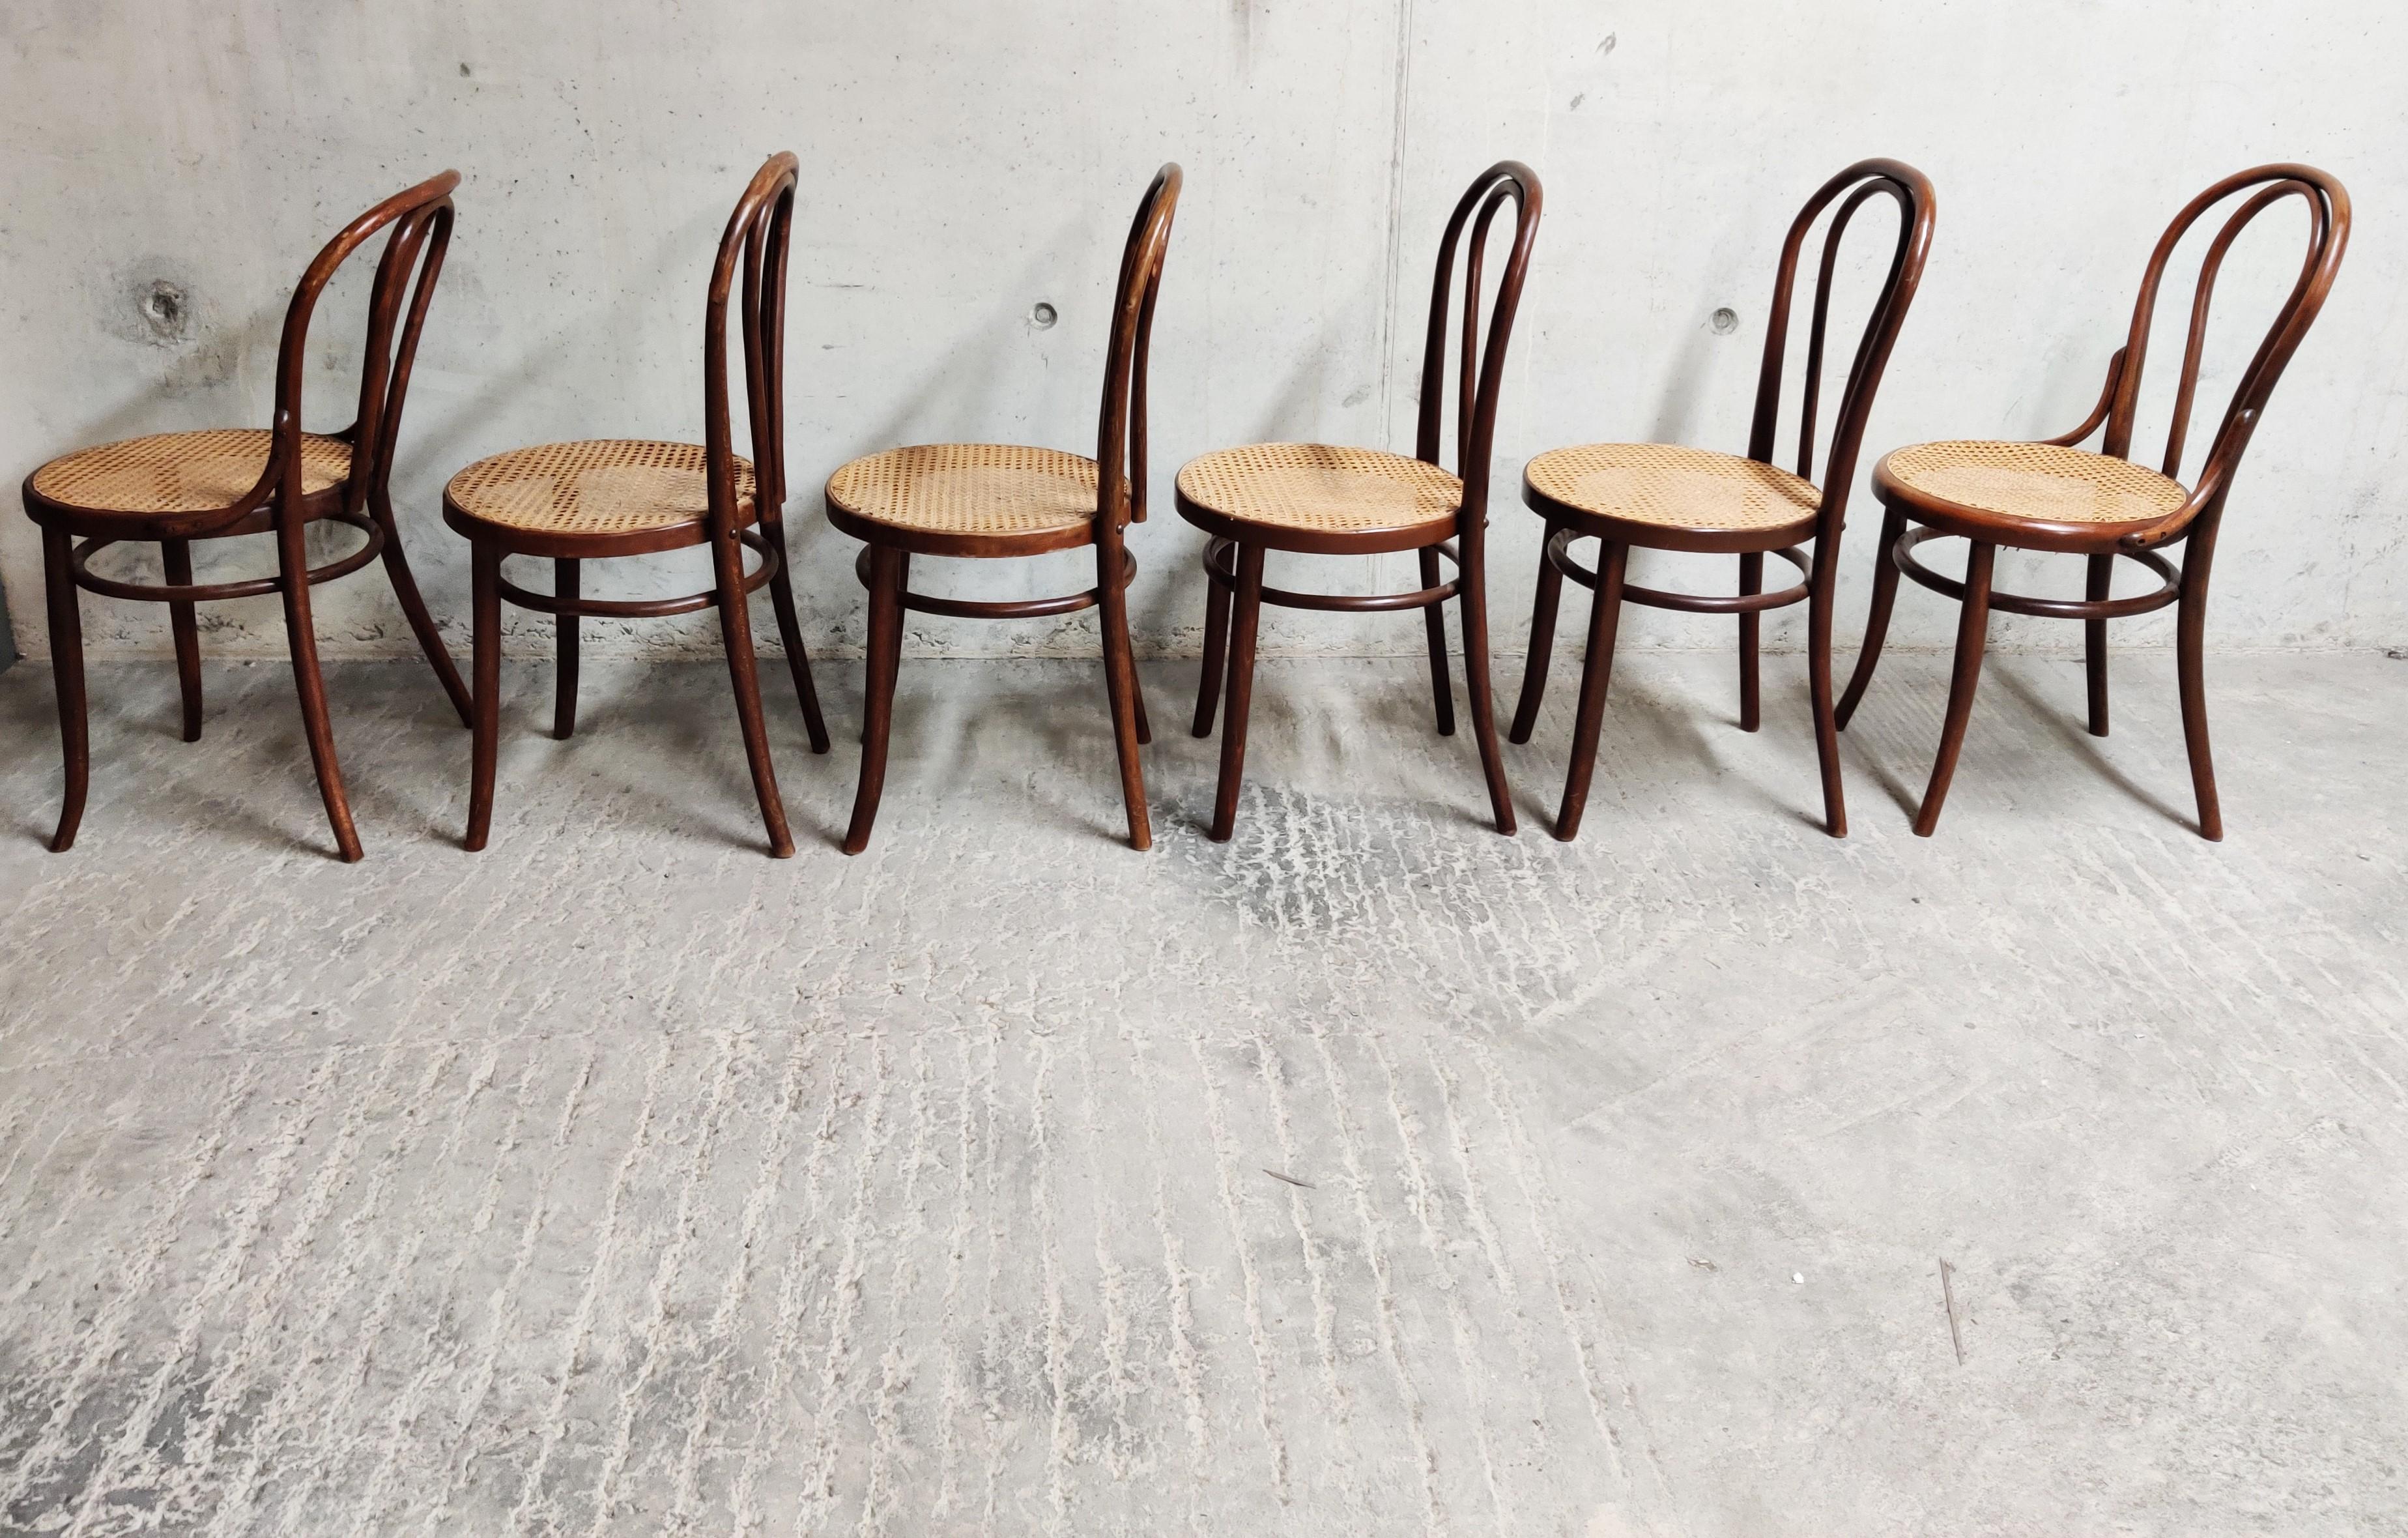 Set of 6 dark brown bent wooden dining chairs, like the thonet no. 18 and 18.

There are 4 chairs the same, and two slightly different (with an extra brace between backrest and seat), but they make a nice set.

The chairs are difficult to date,